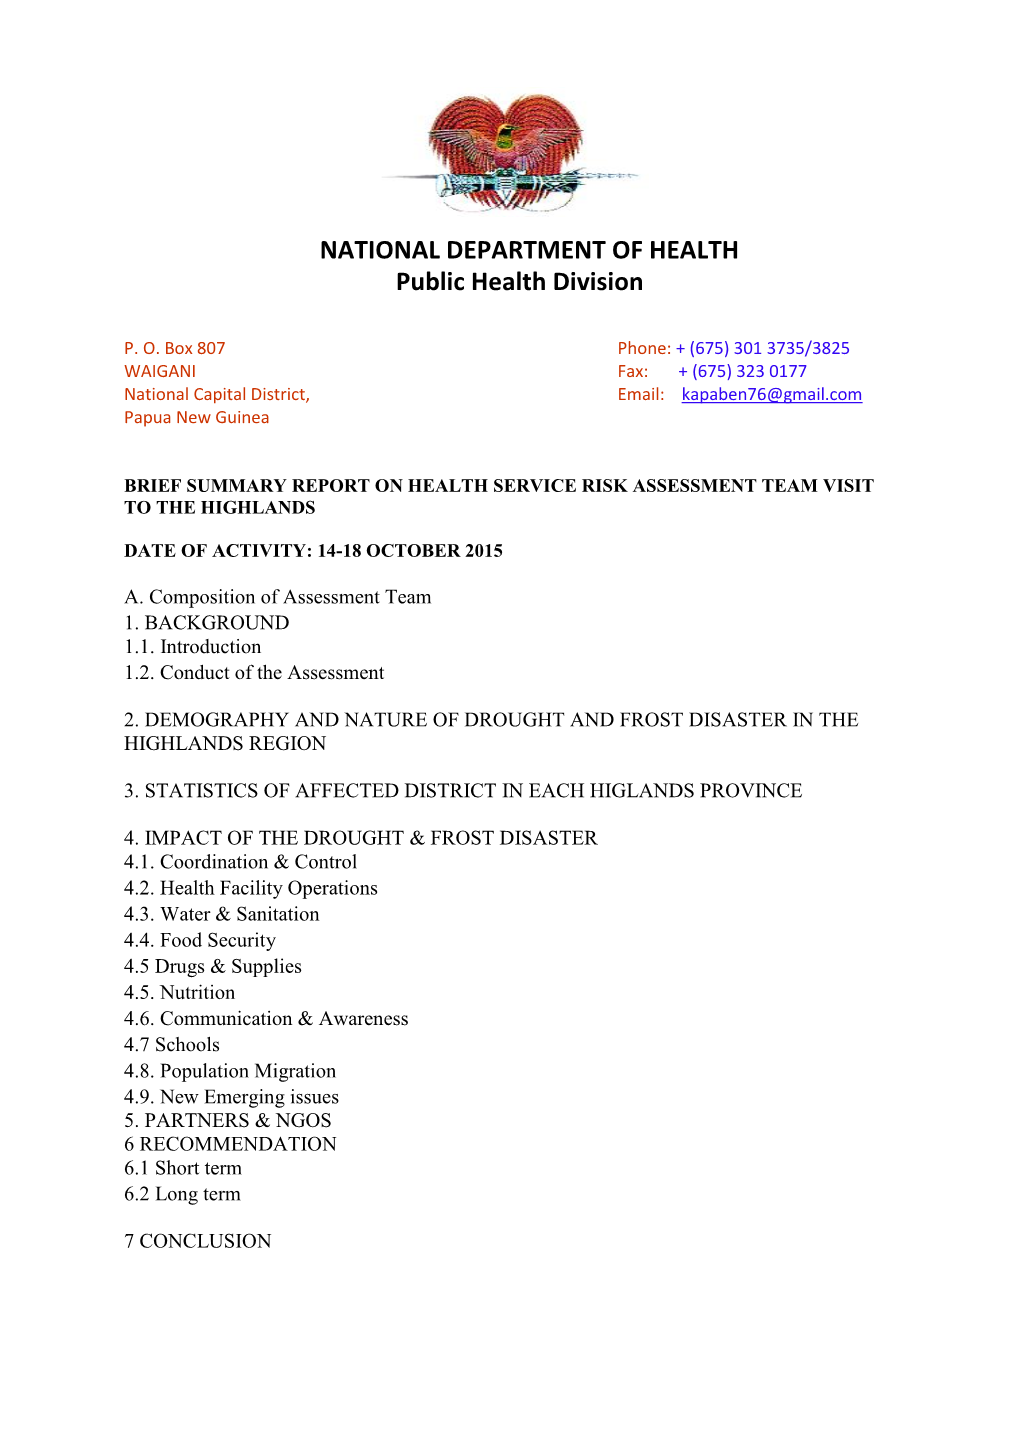 NATIONAL DEPARTMENT of HEALTH Public Health Division